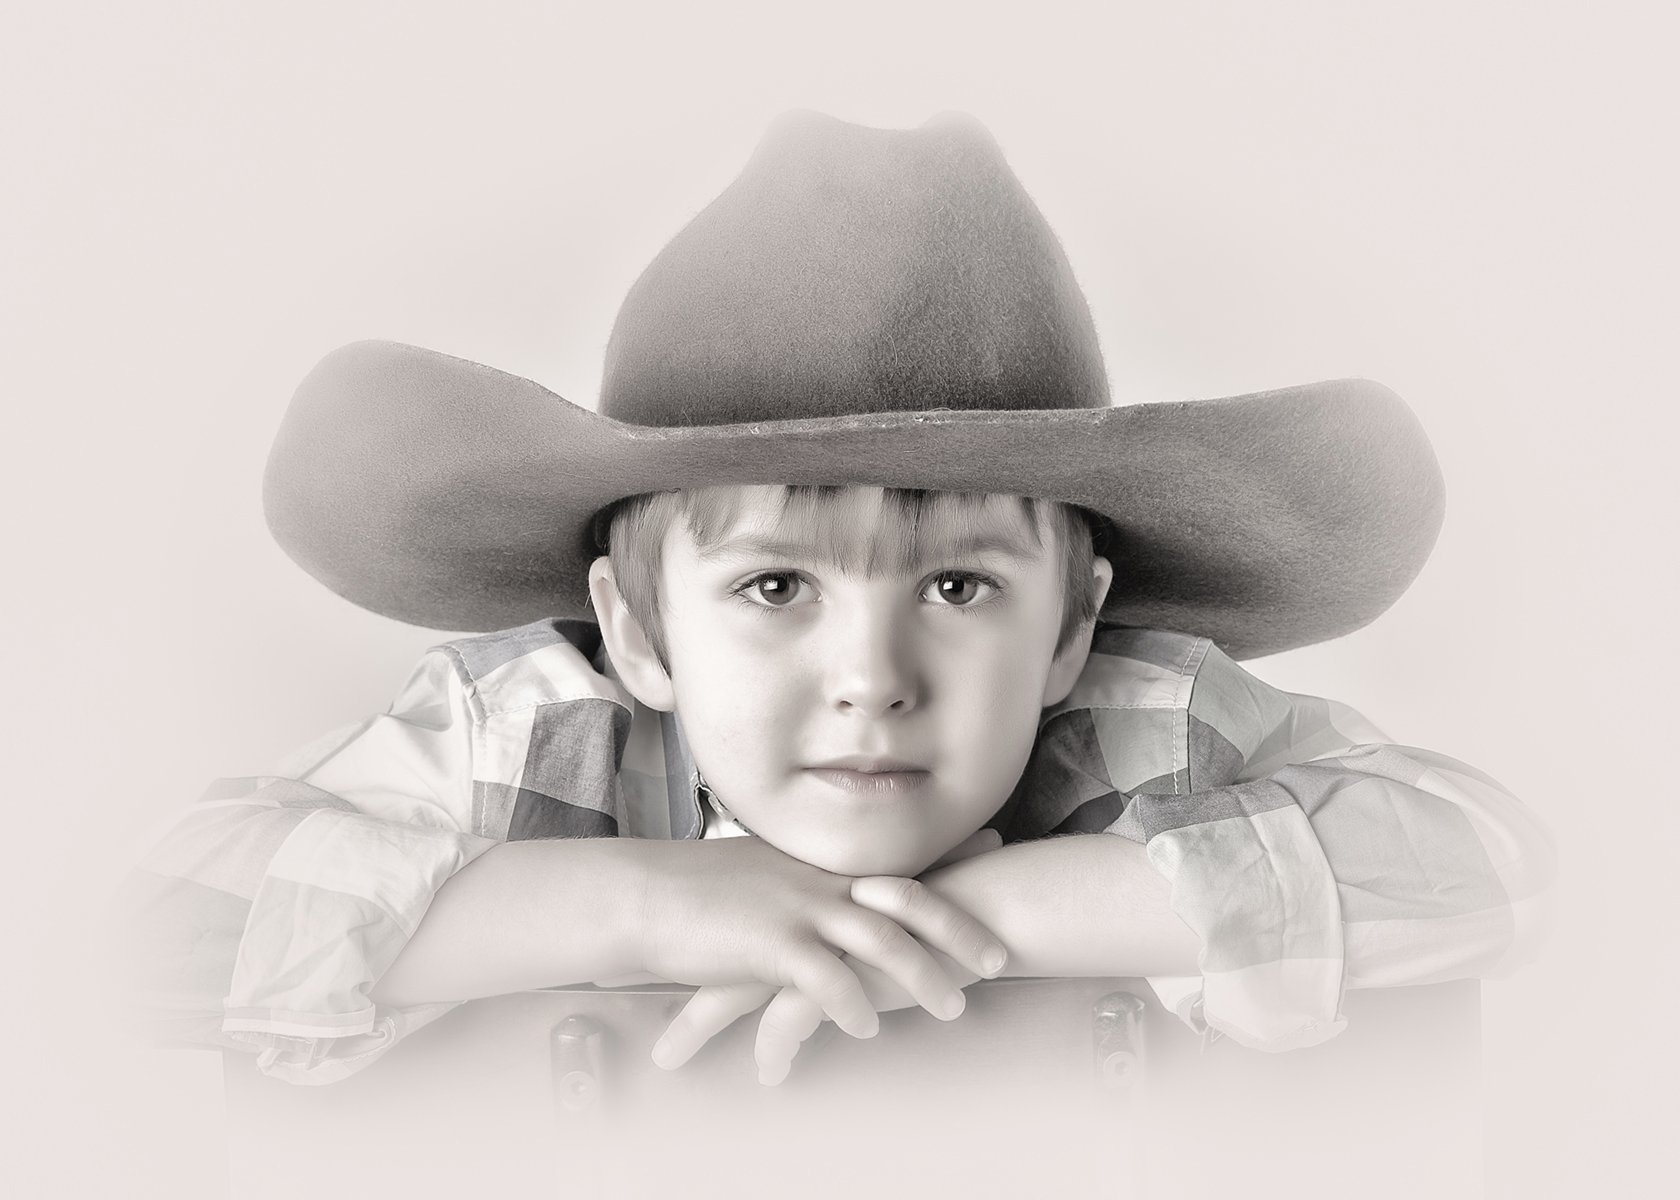 Portrait of a young boy in a cowboy hat taken at a San Antonio professional photographer's studio